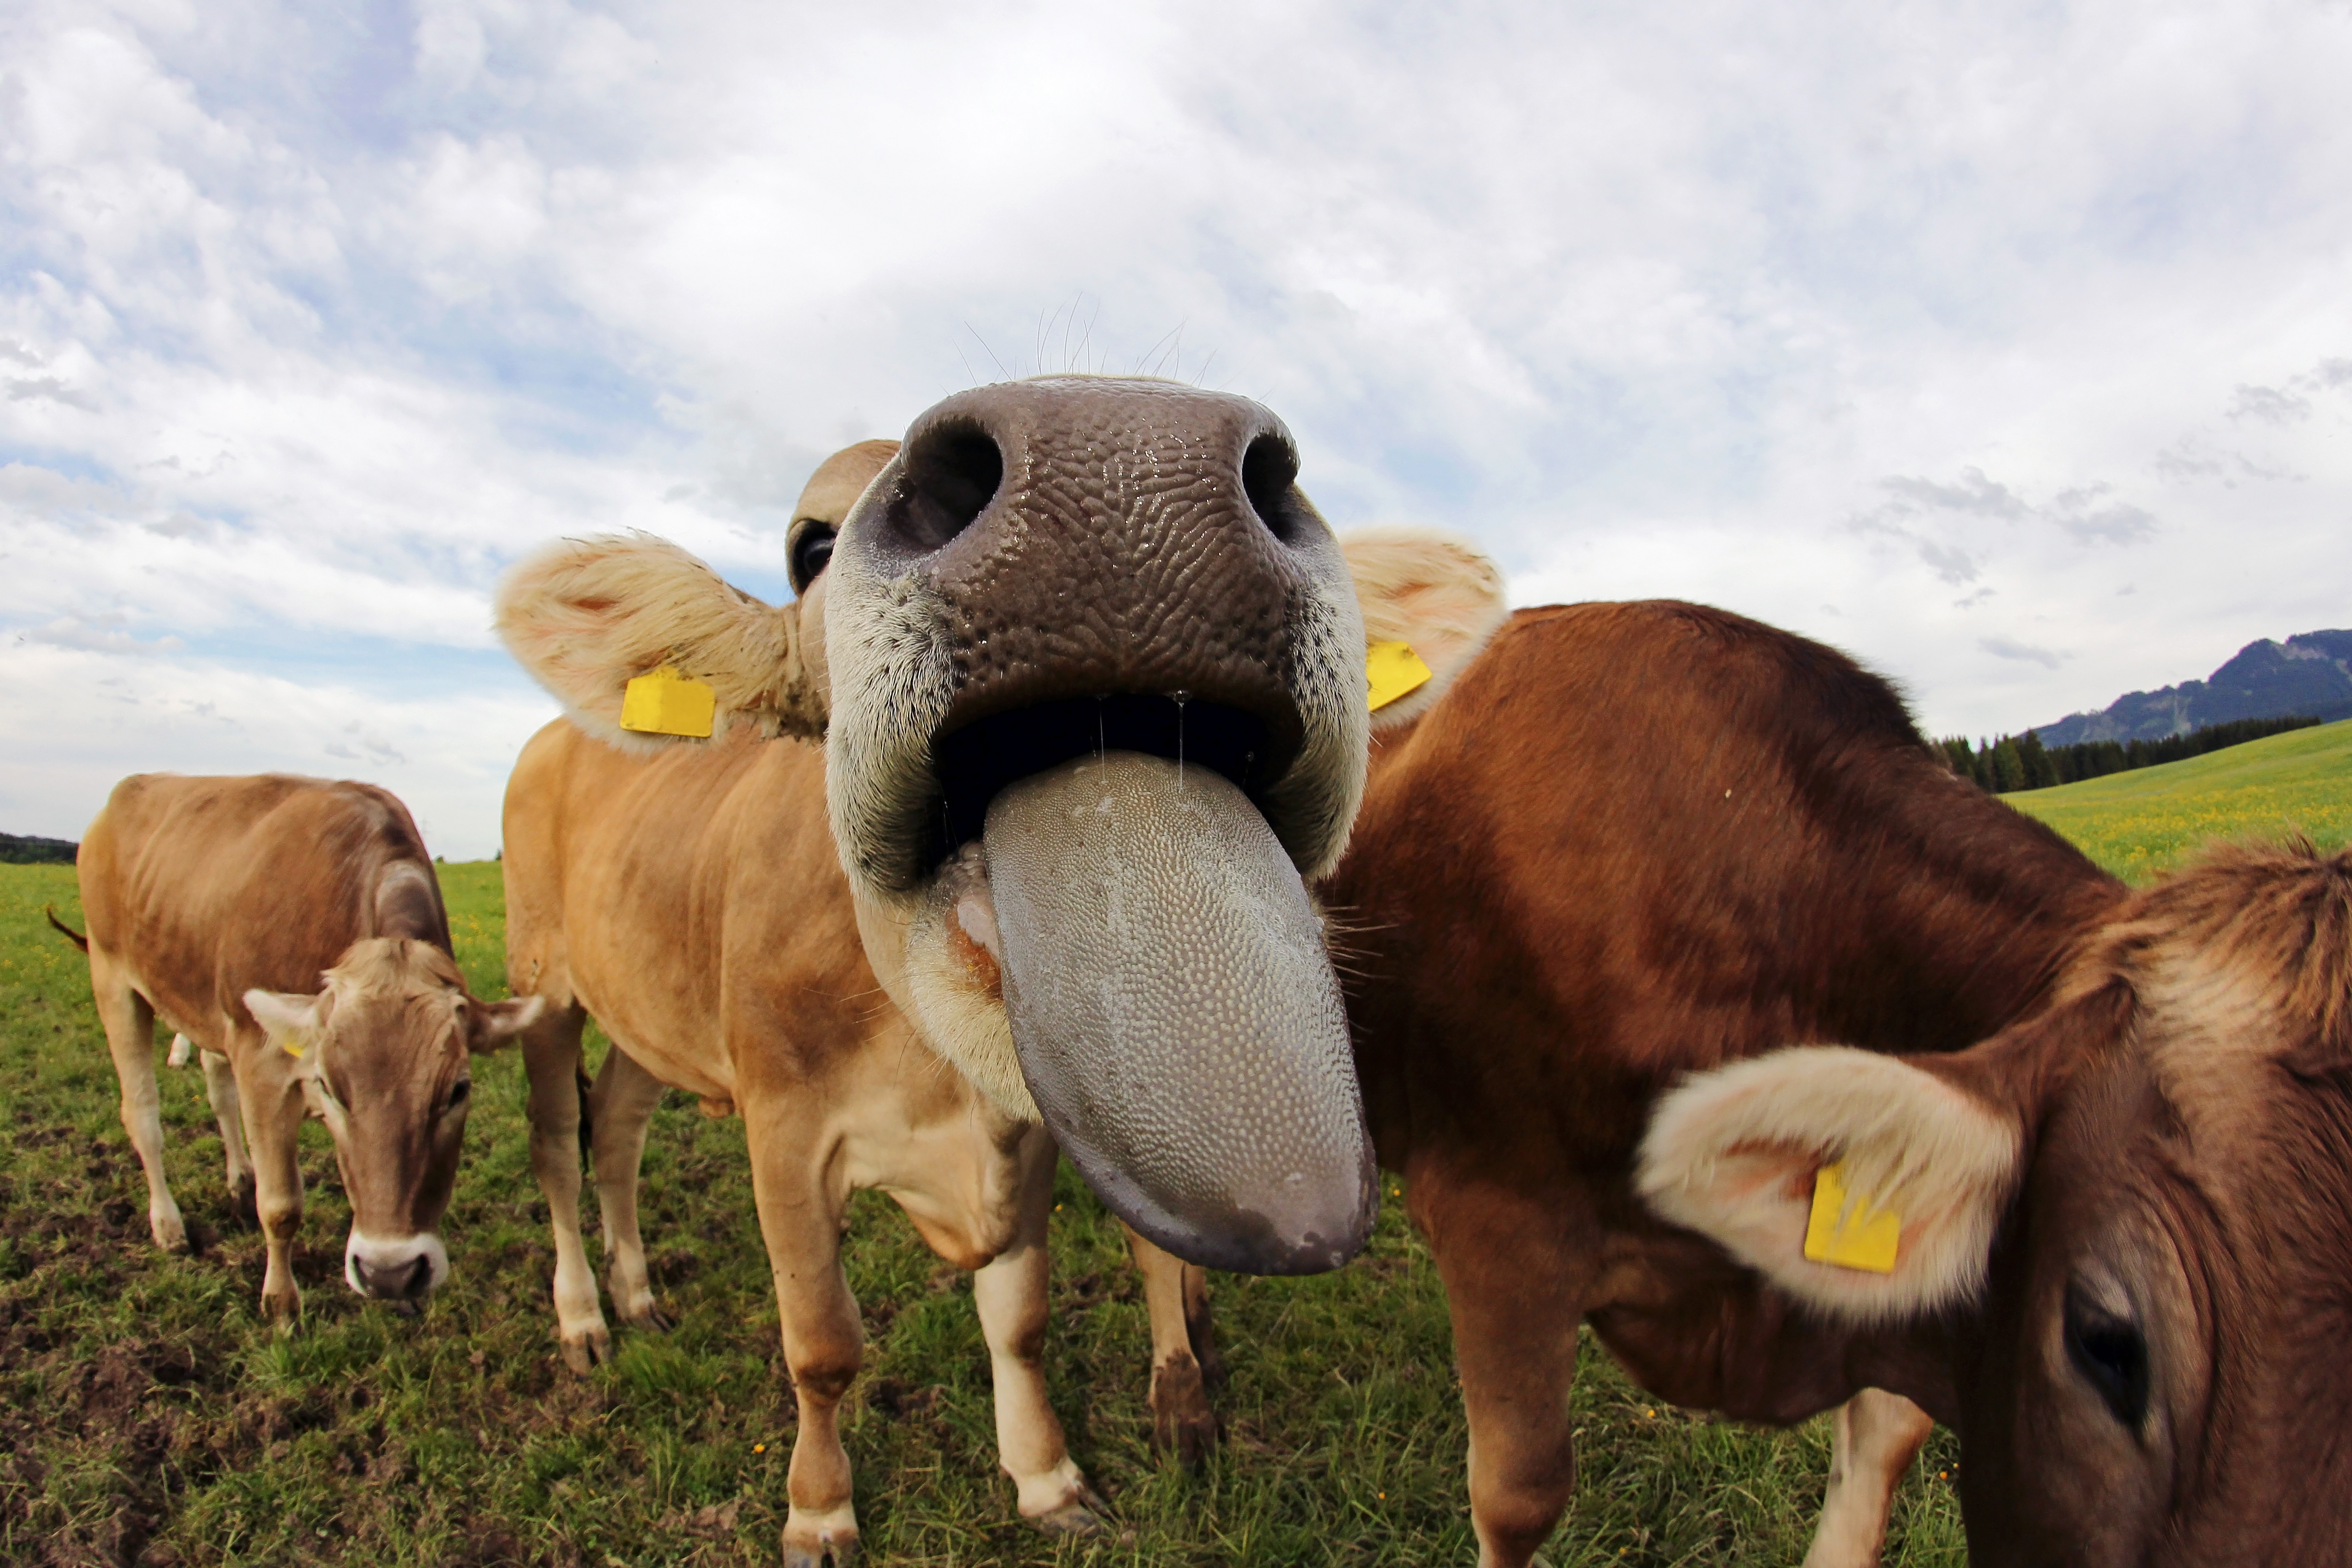 Cows can be a part of the climate solution